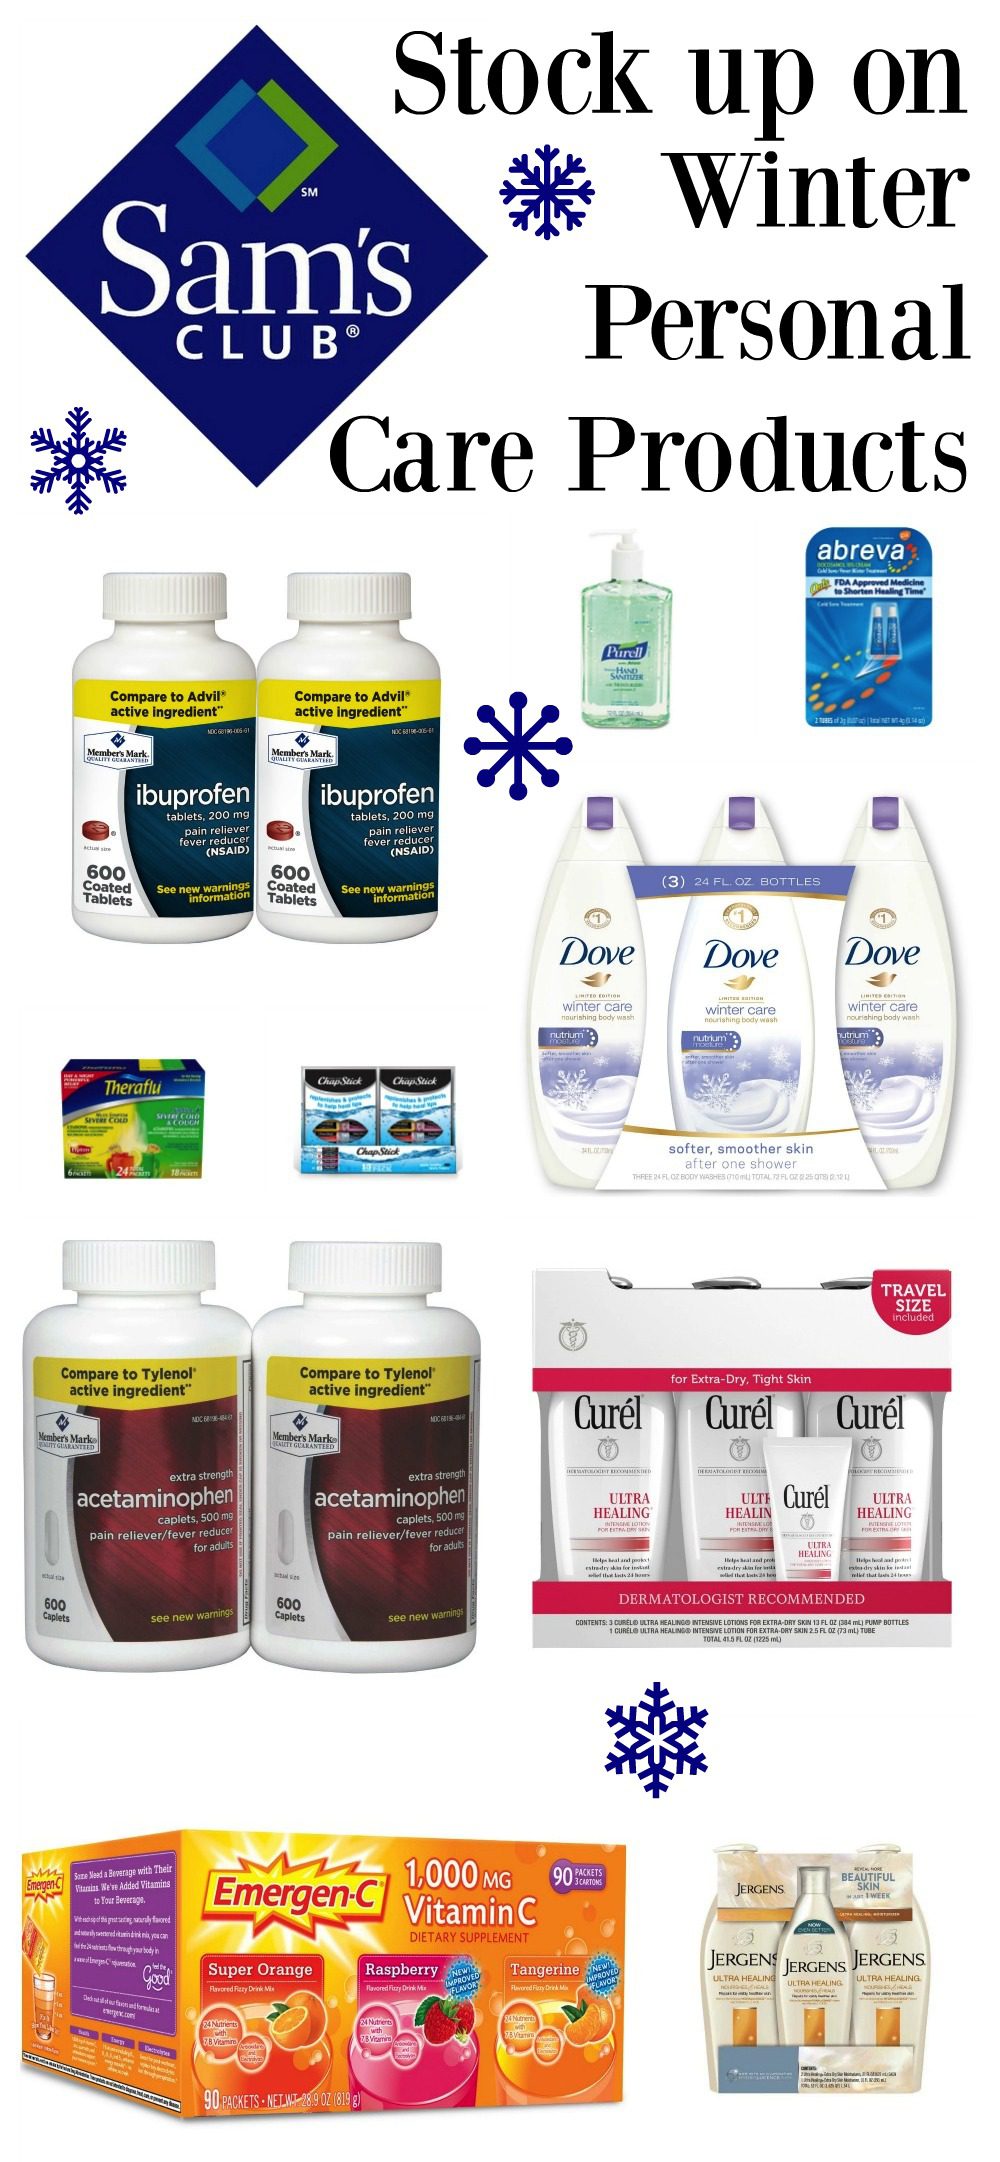 Stock up with Sam's Club Winter Personal Care Products - Divine Lifestyle